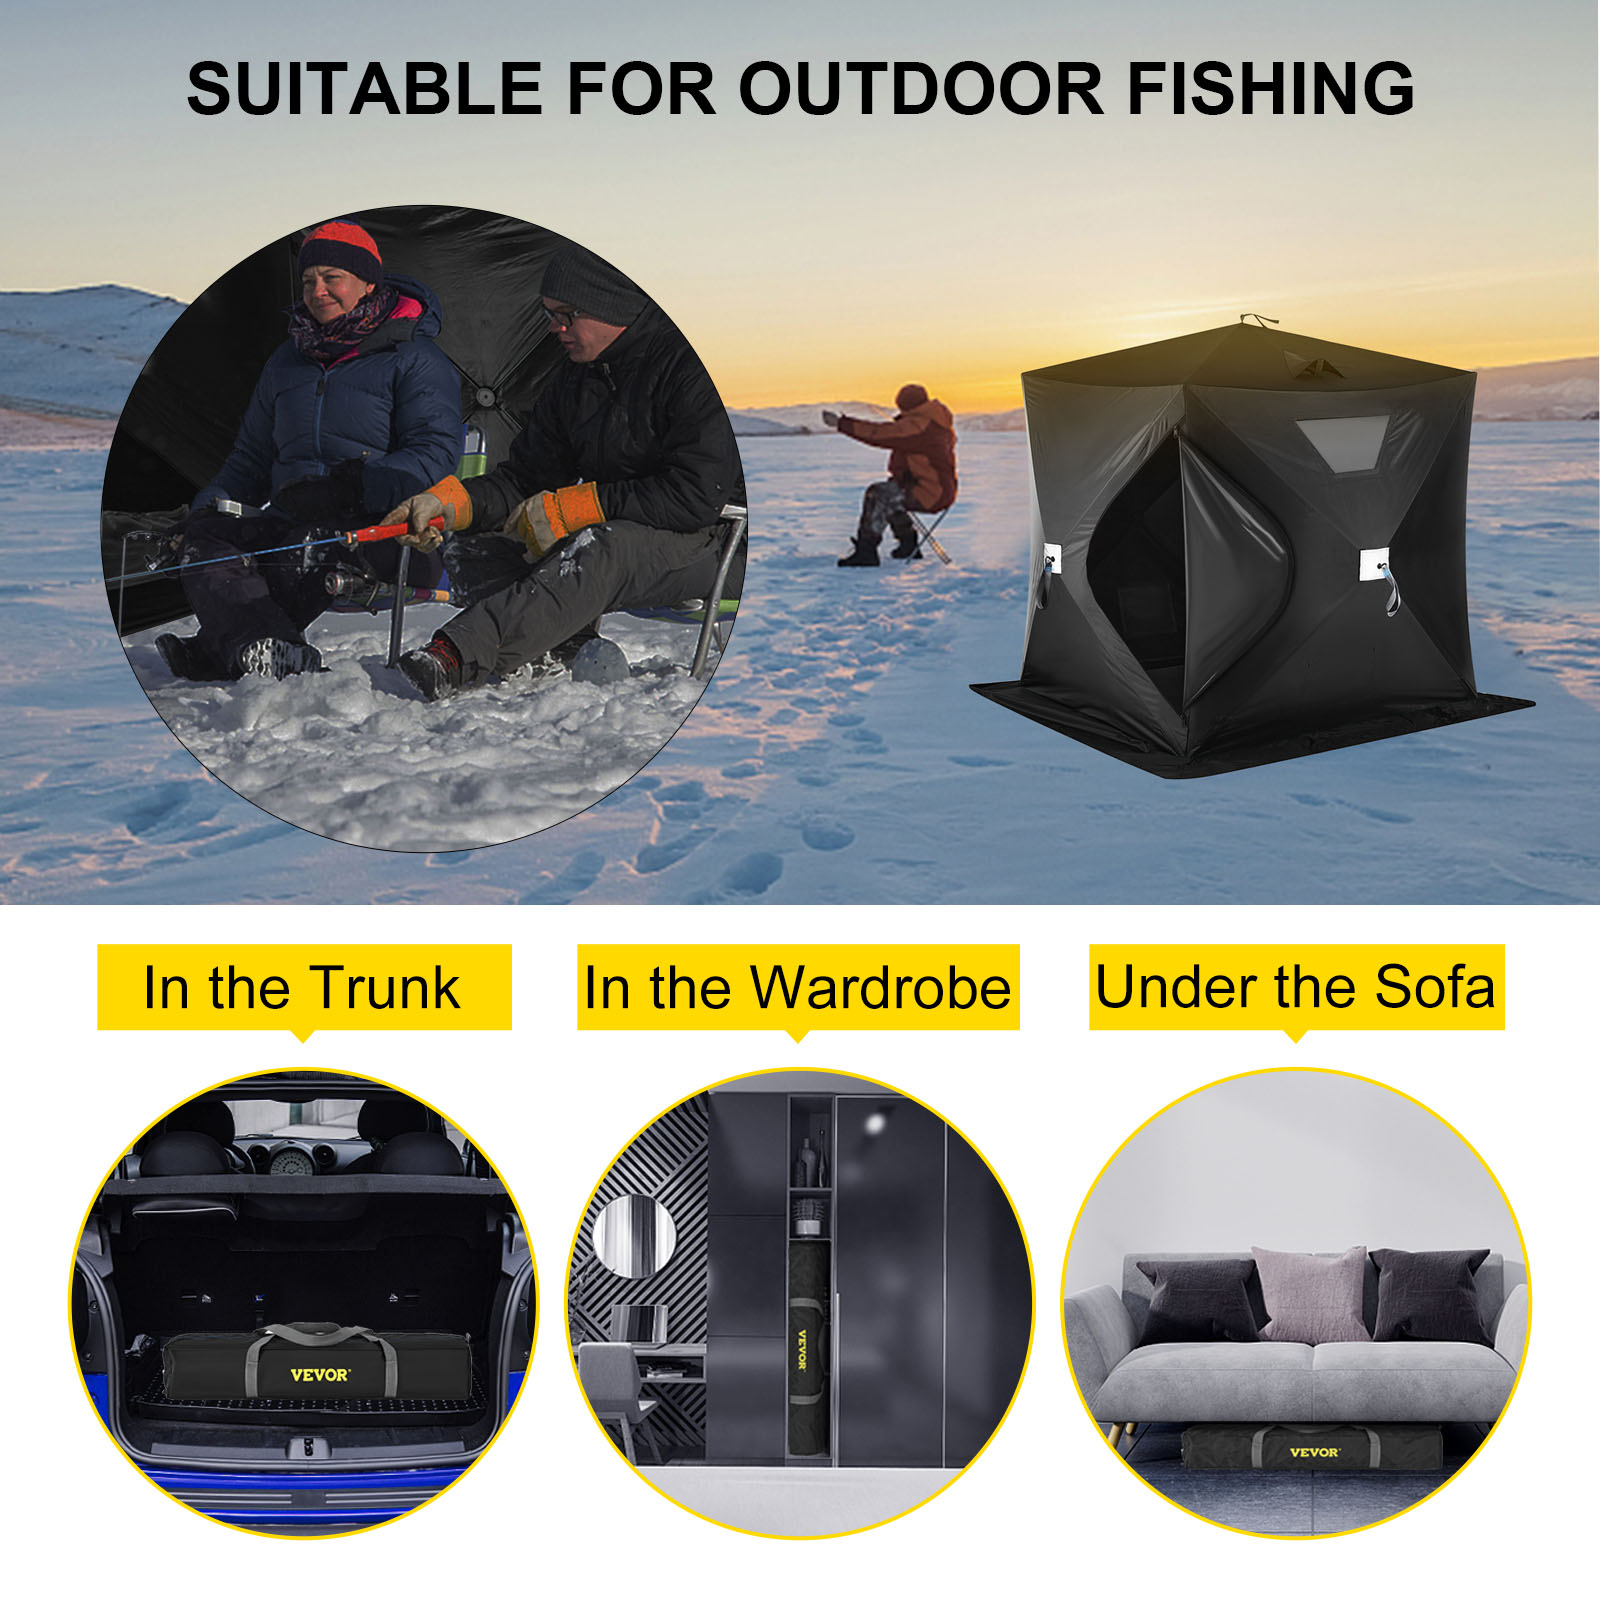 VEVOR 2-3 Person Ice Fishing Shelter Tent, 300D Oxford Fabric